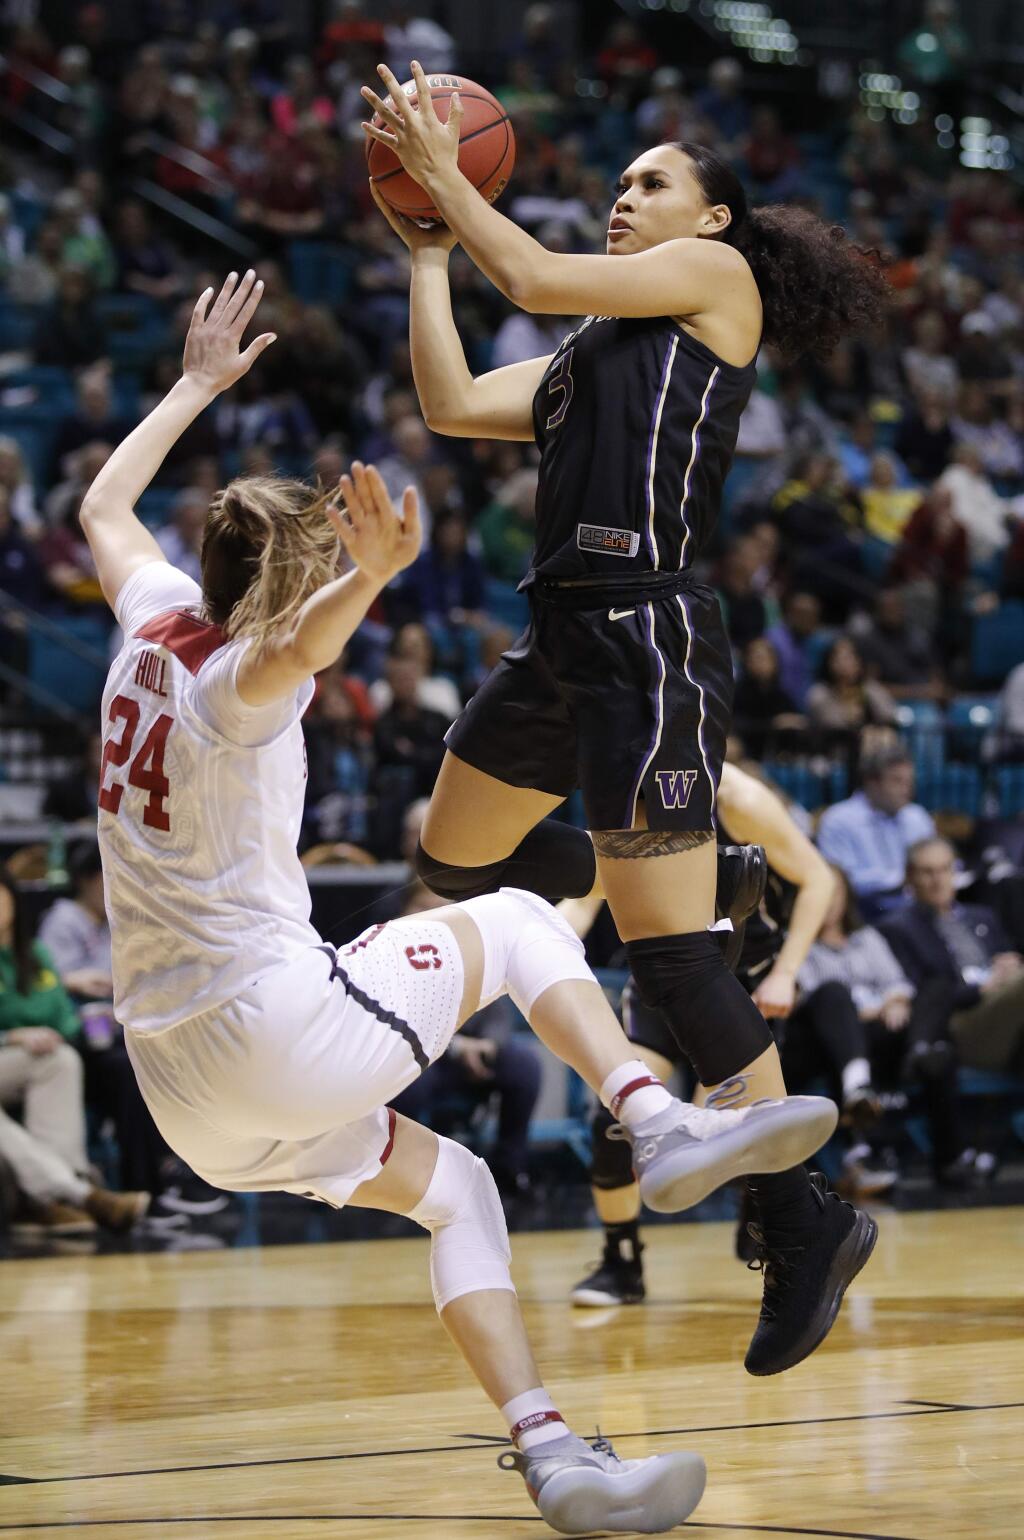 Washington's Mai-Loni Henson drives into Stanford's Lacie Hull during the first half in the semifinals of the Pac-12 women's tournament Saturday, March 9, 2019, in Las Vegas. (AP Photo/John Locher)